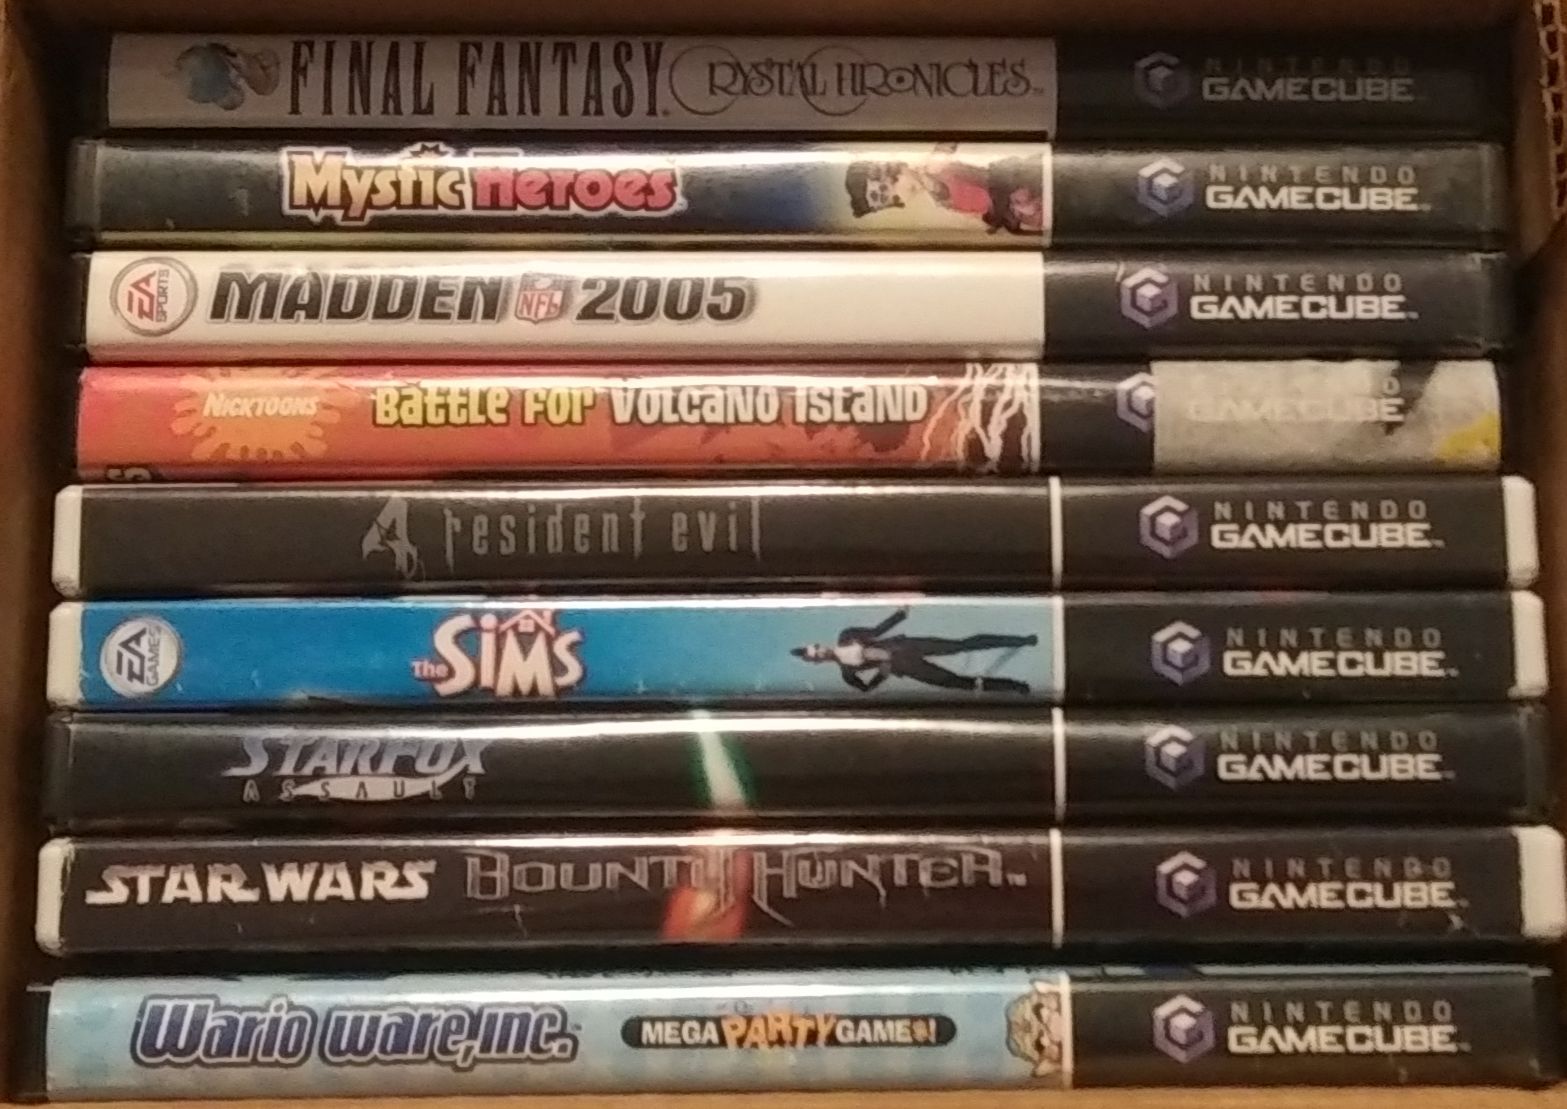 Primary image for Nintendo GameCube Case, Cover Art and Instruction Manual Lot - No Games Included